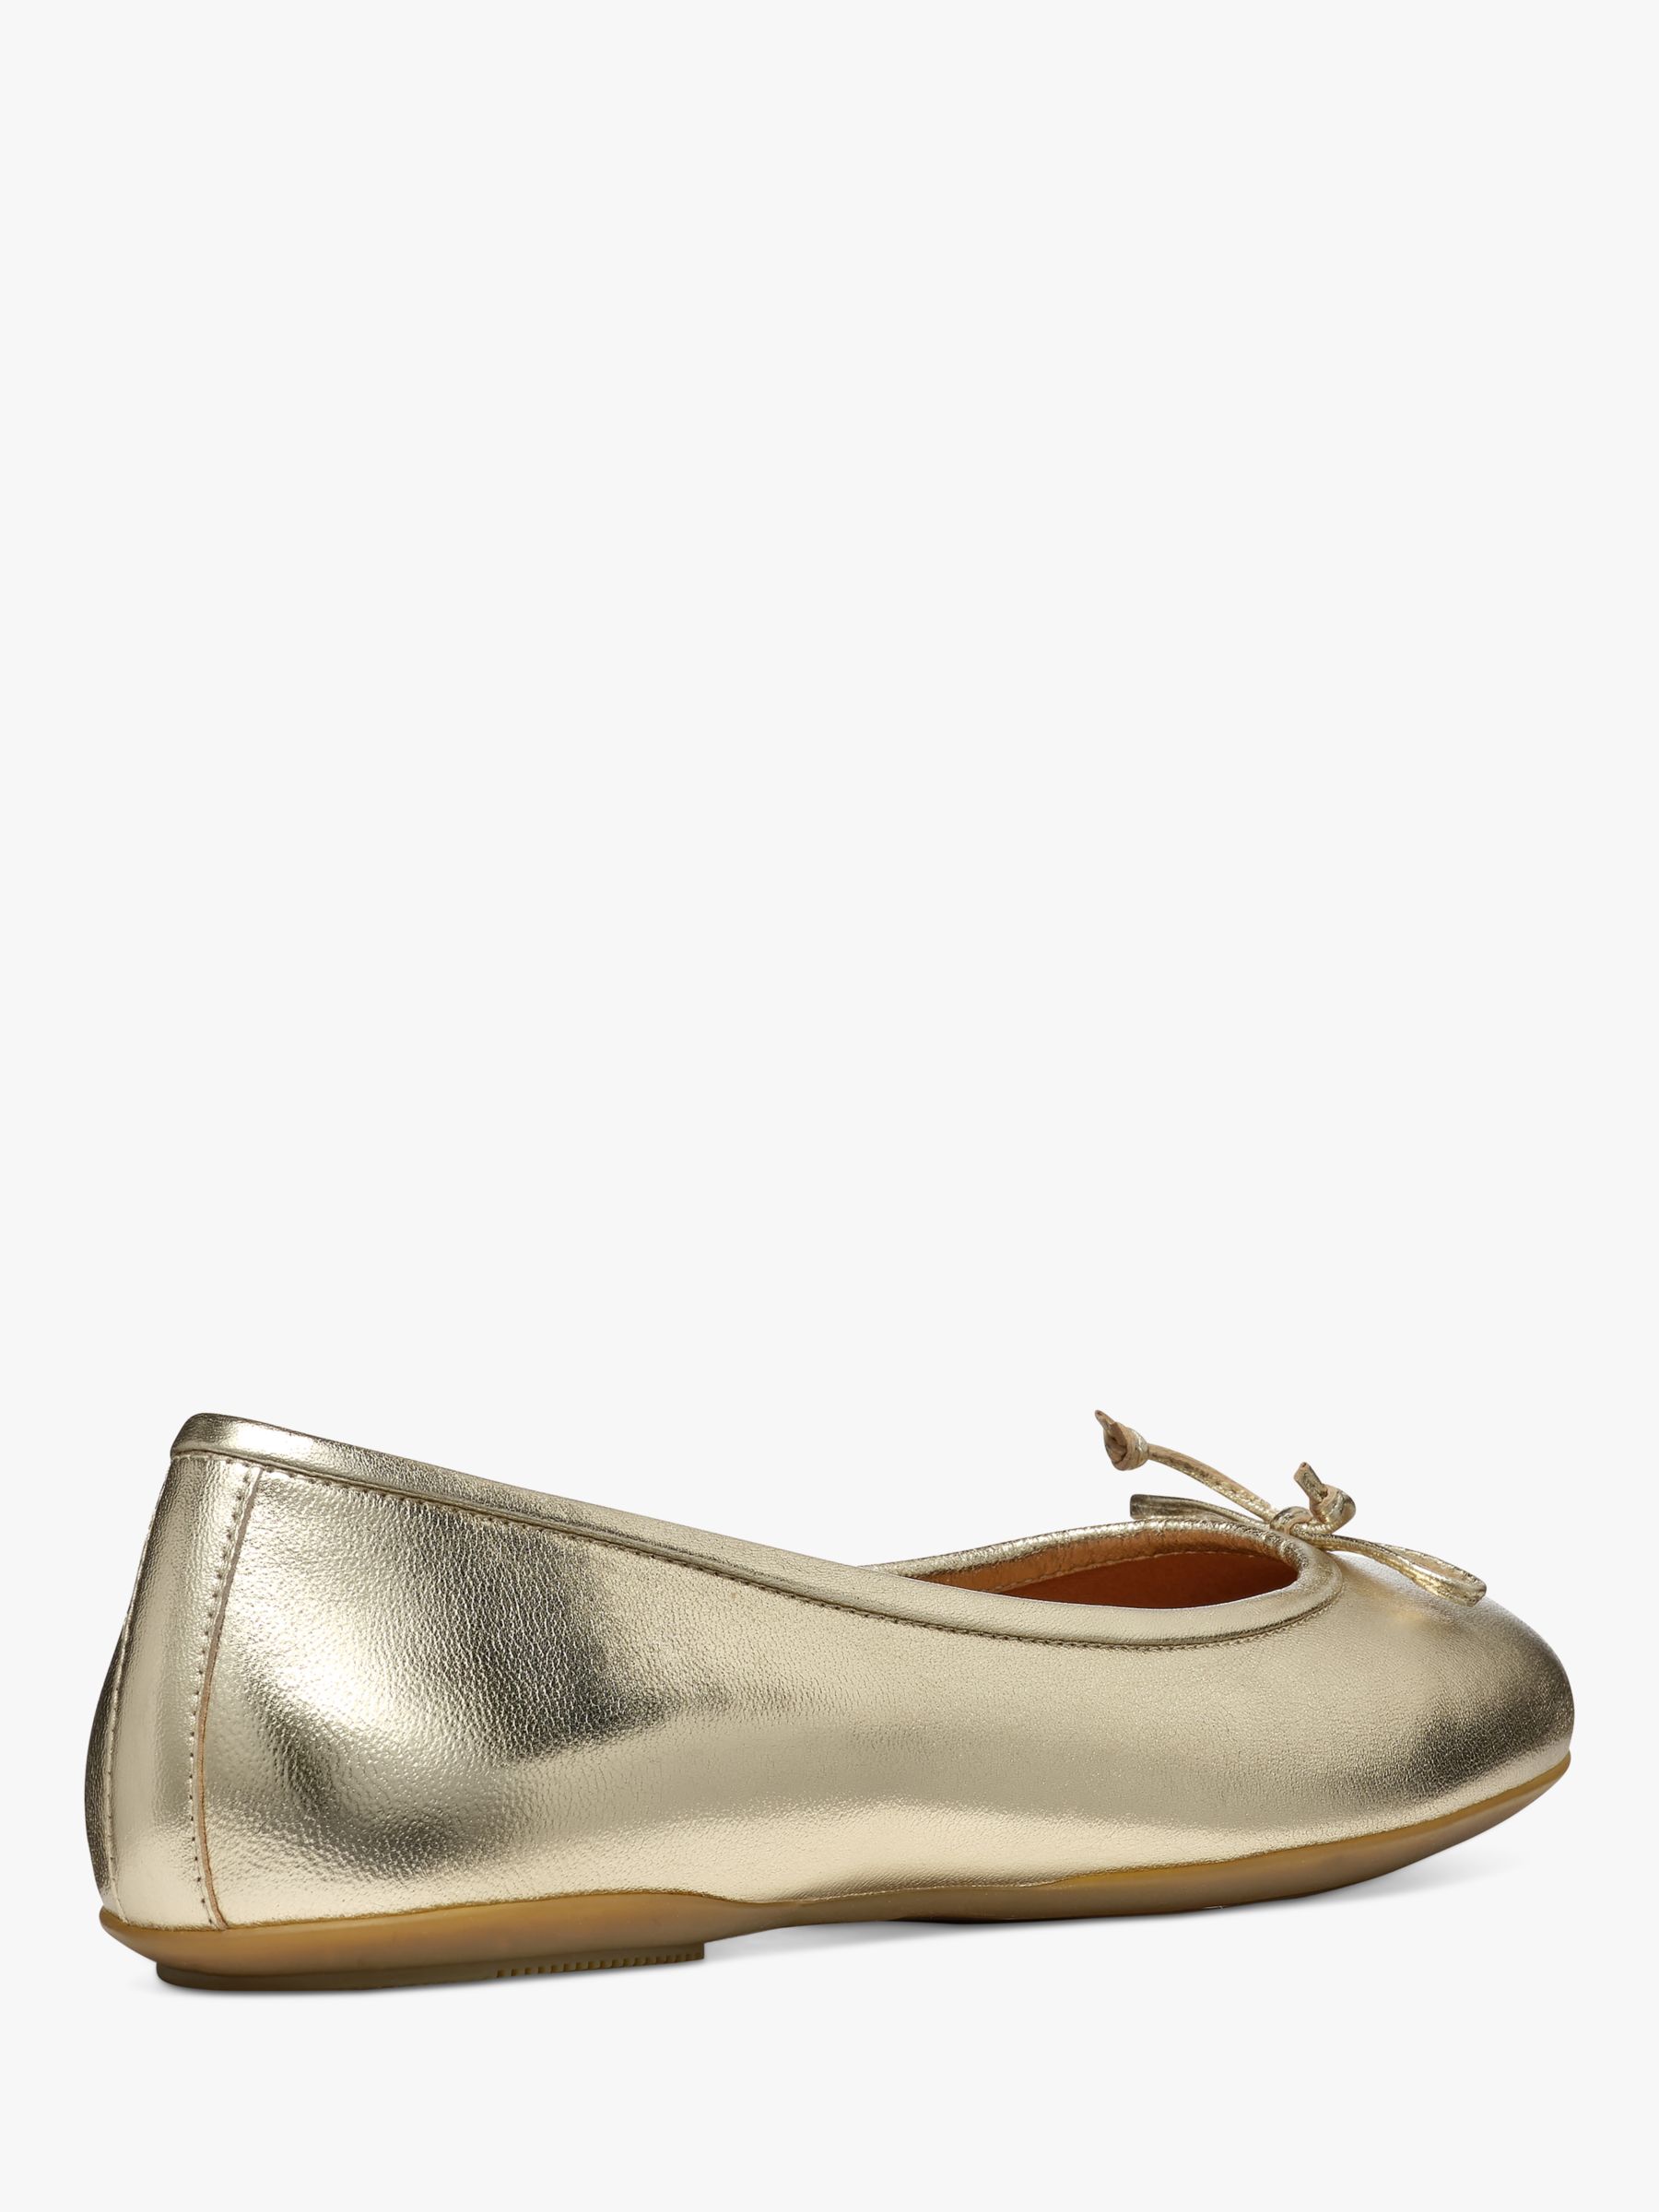 Buy Geox Palmaria Leather Ballerina Shoes, Gold Online at johnlewis.com